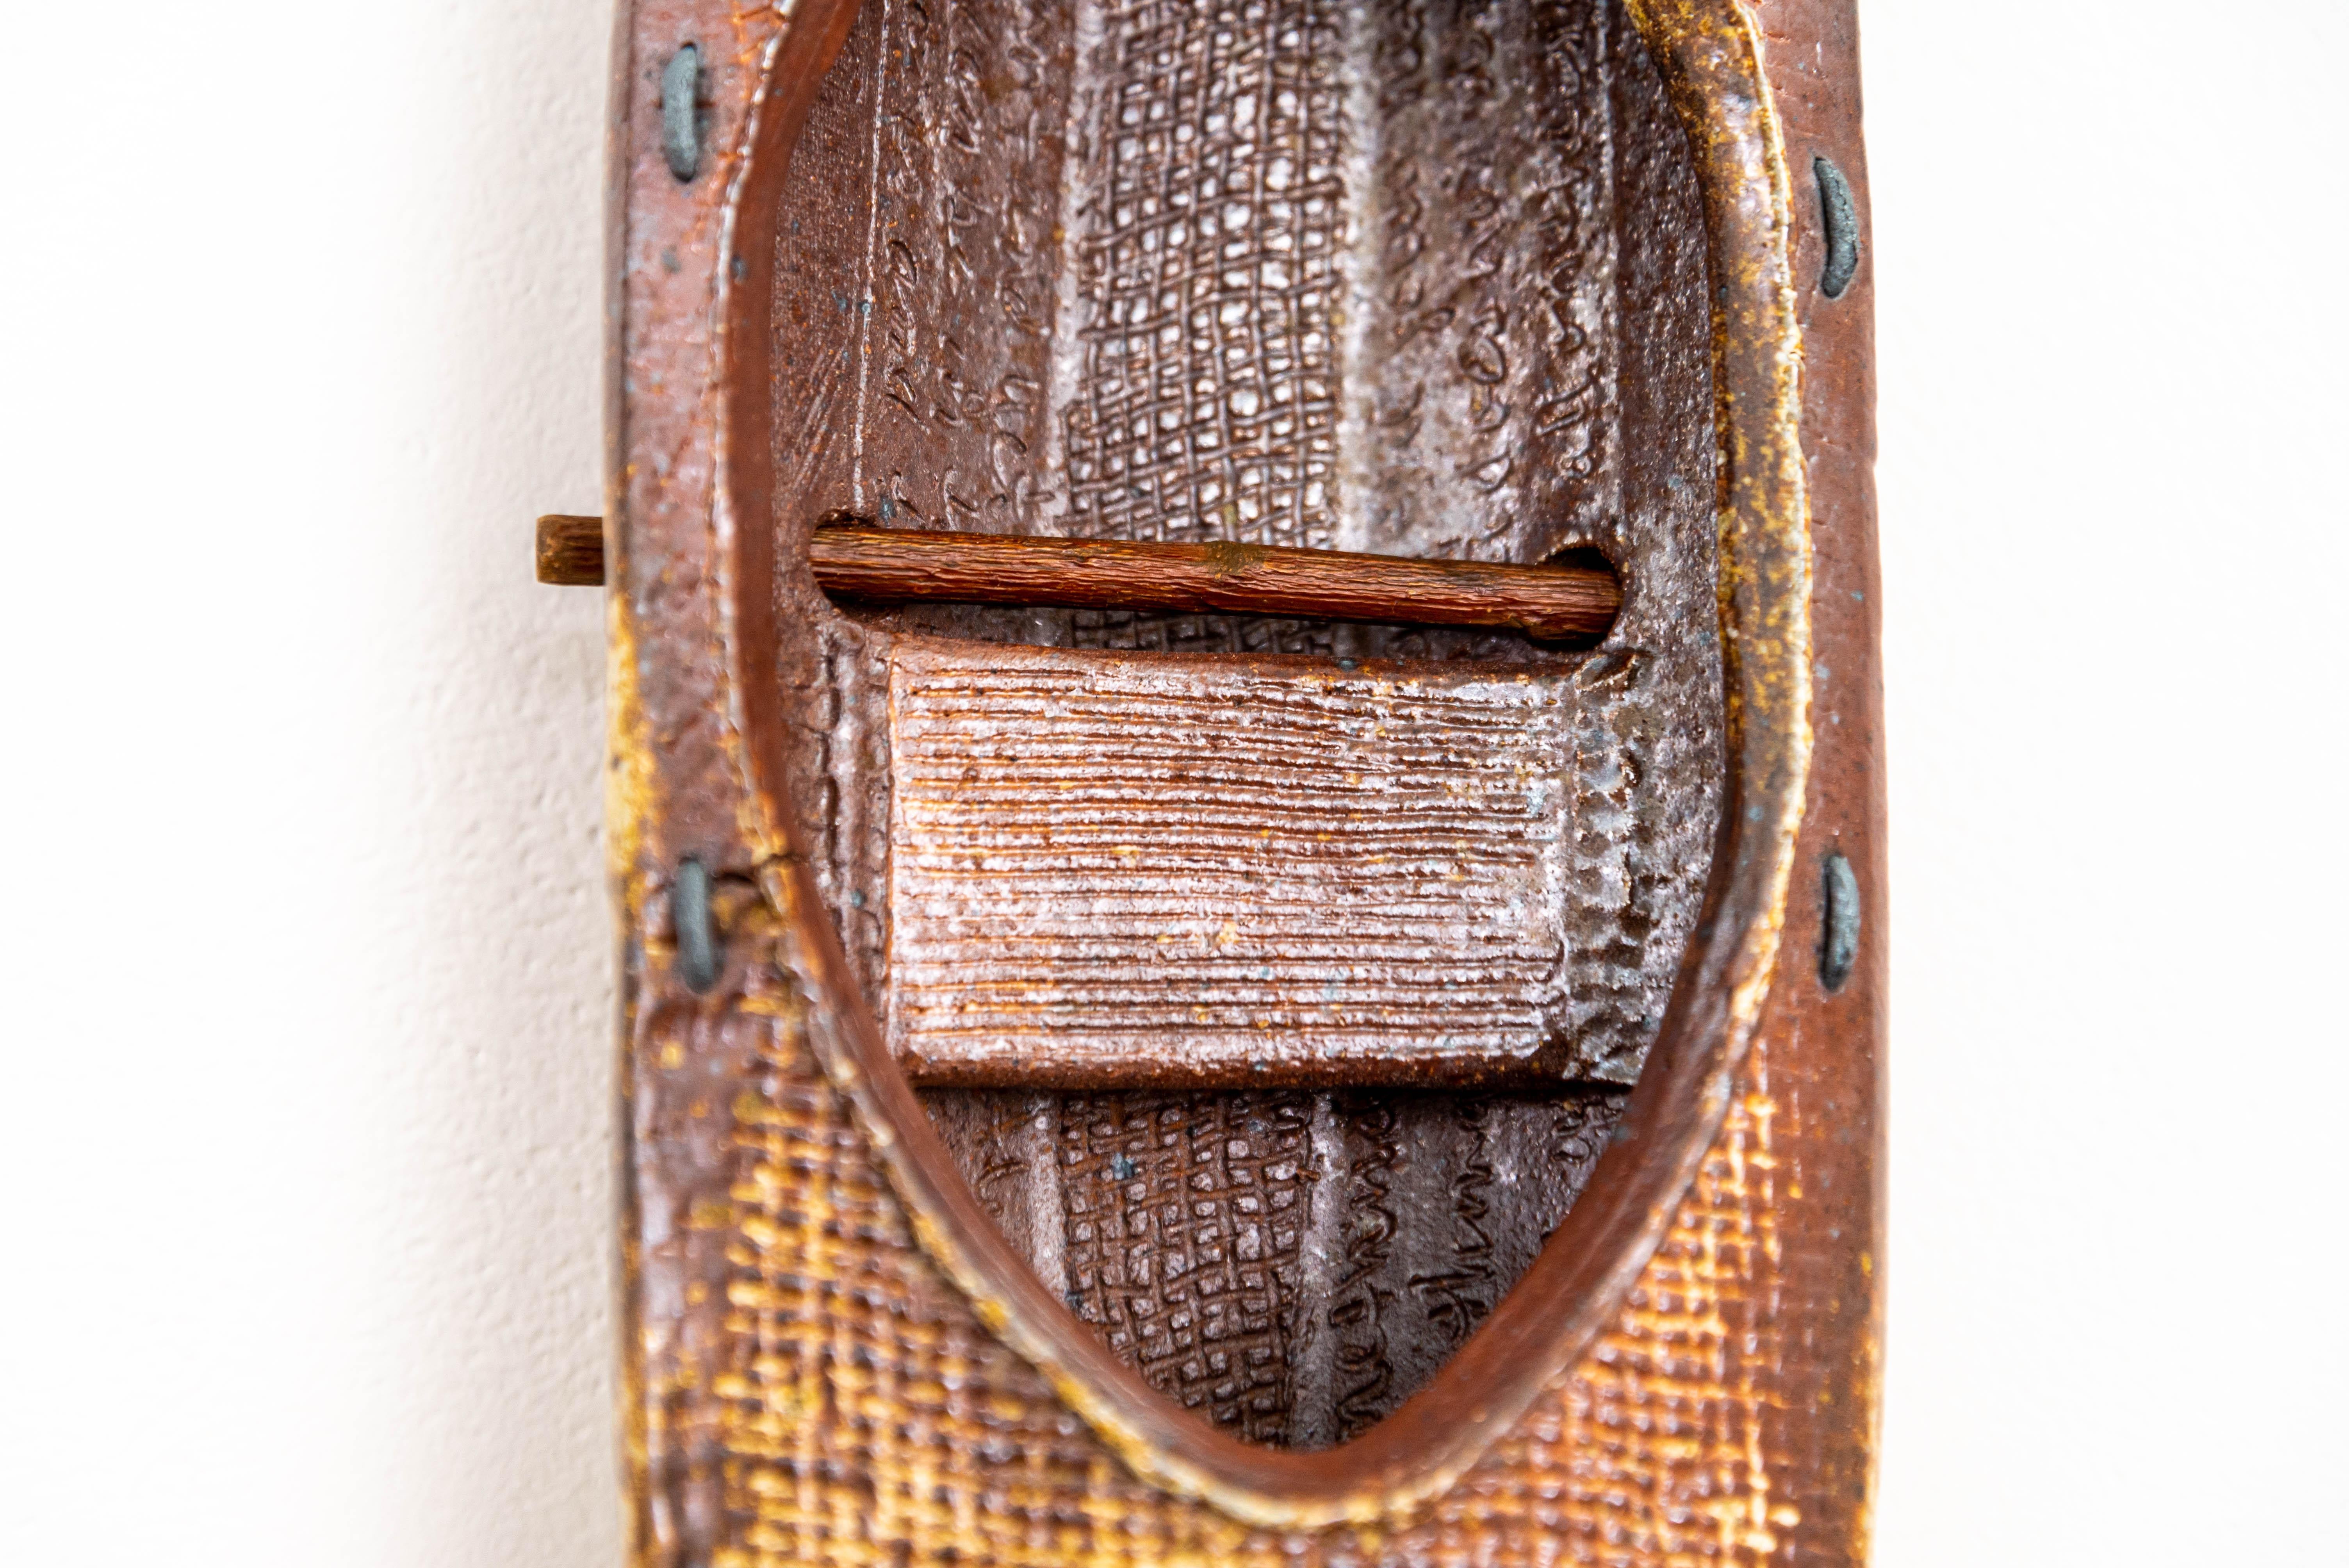 This stunning mixed media composition was created by Heather Allen Hietala. The American artist hand-builds canoe-like shapes from clay—this piece features five vessels, each unique in their design. Six paddle-like metal pieces are displayed between